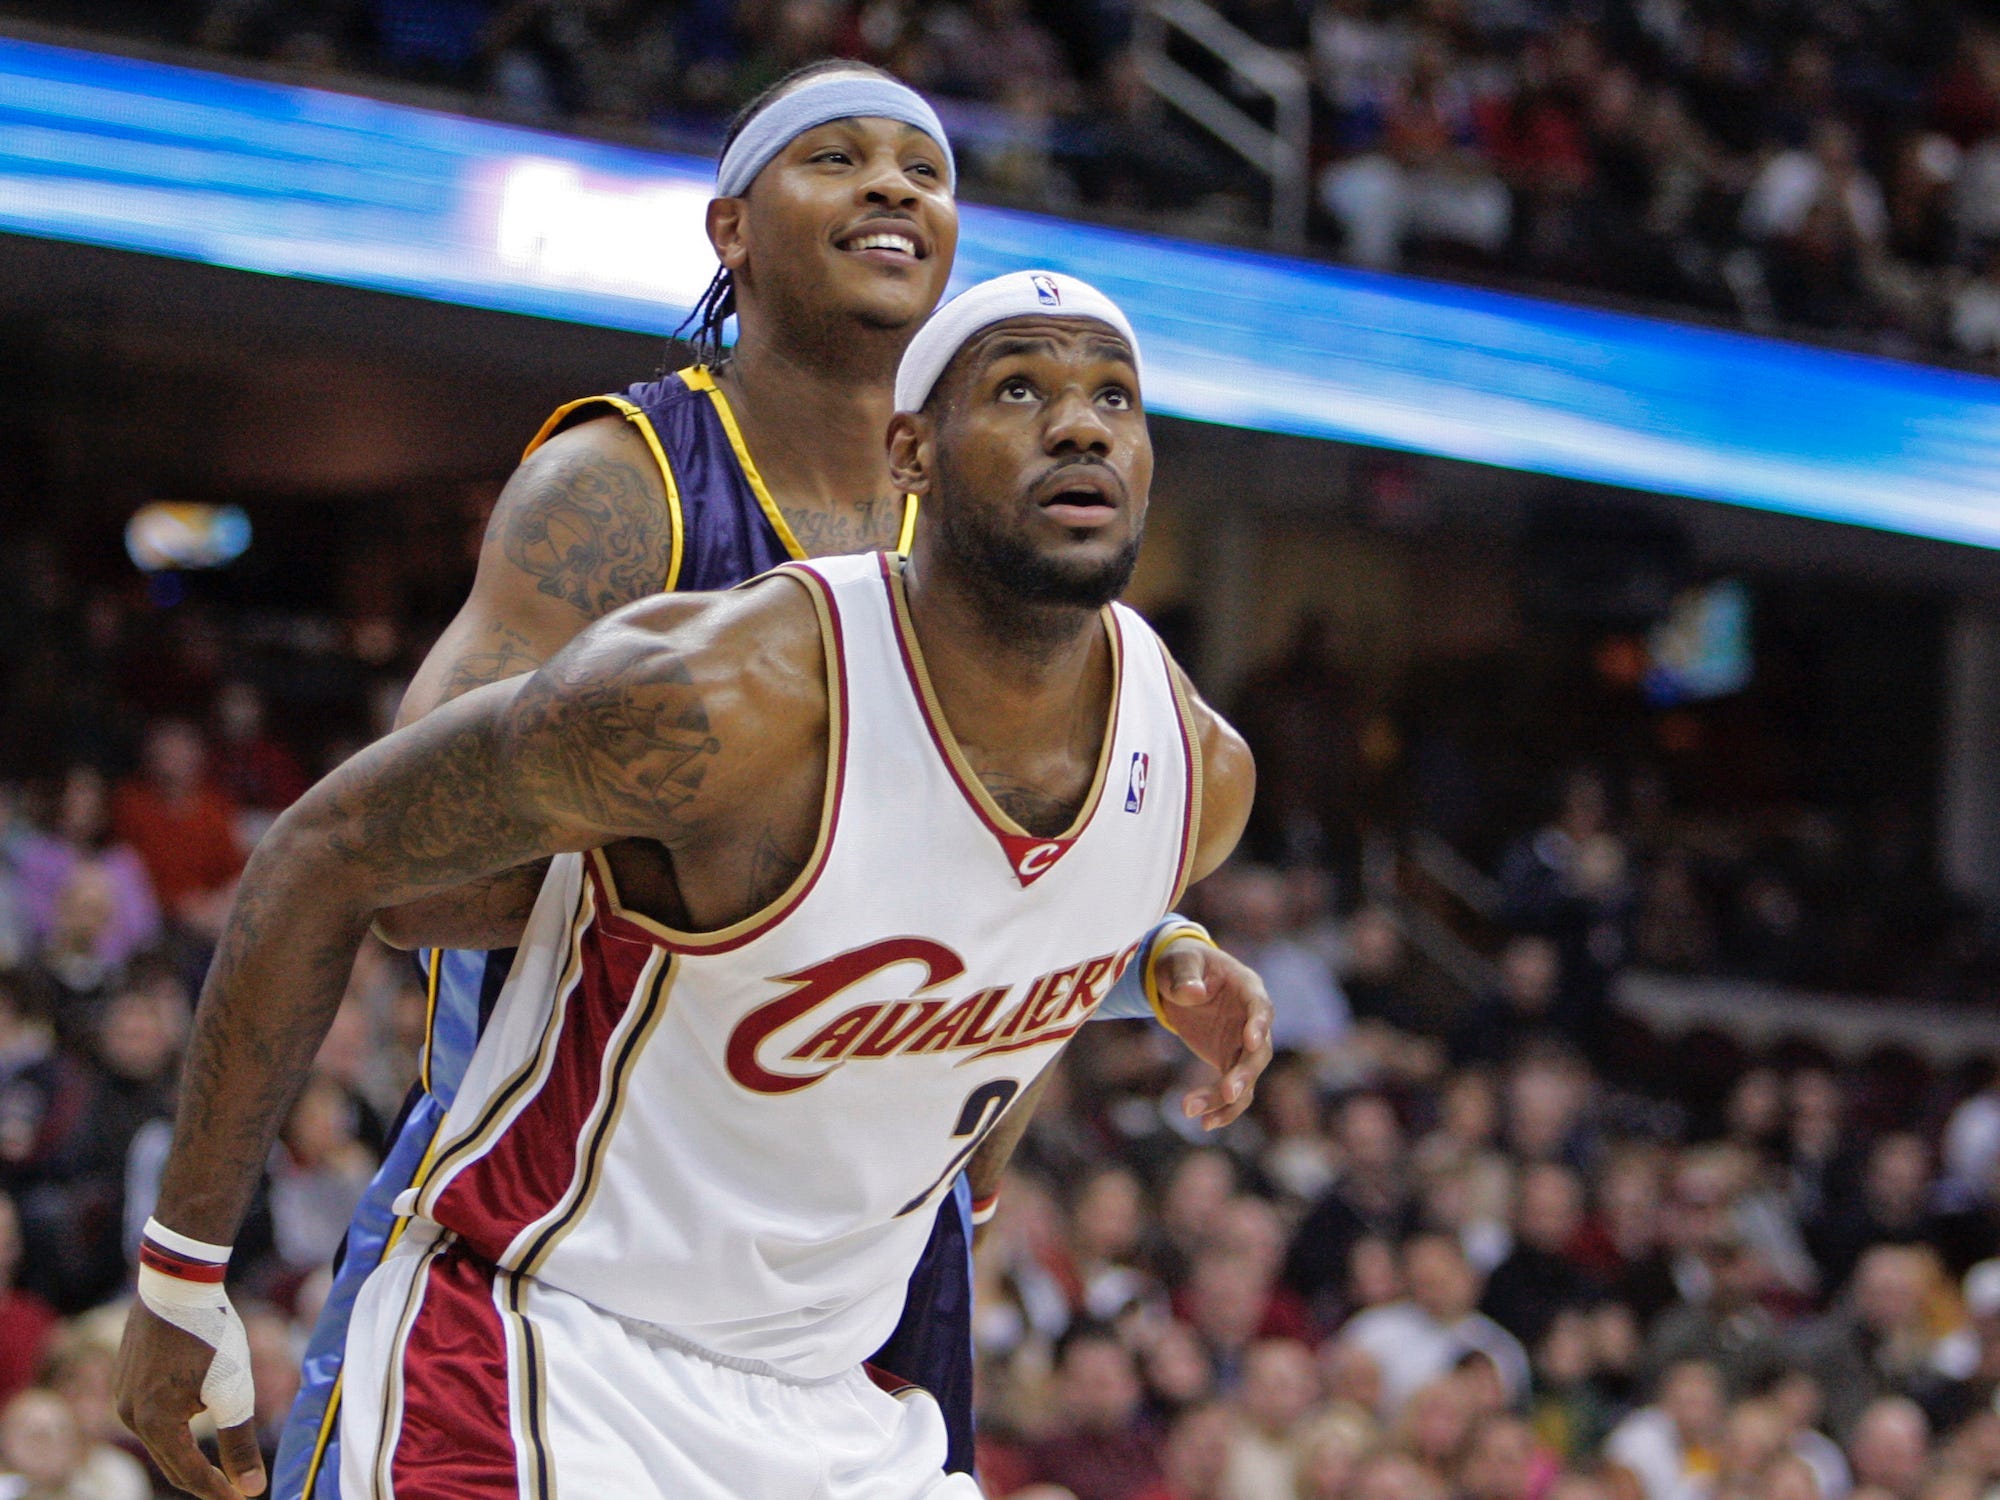 LeBron James boxes out Carmelo Anthony during a 2008 game.